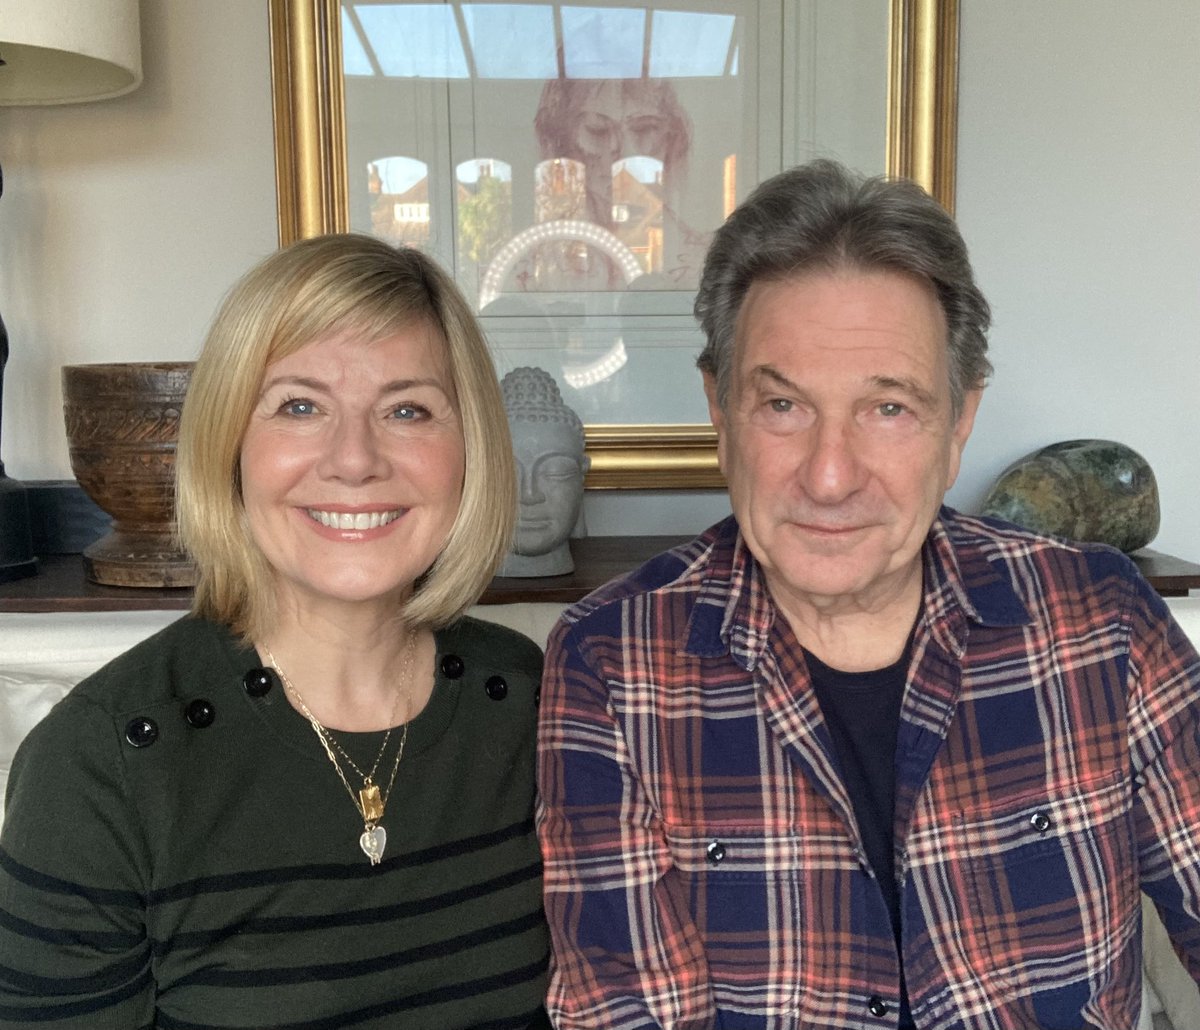 If you’ve always wanted to try meditation but haven’t known how to go about it, just click on link to get a taster session with me and @MrMBrandon in the new Ageless video: m.youtube.com/@AgelessbyGlyn…